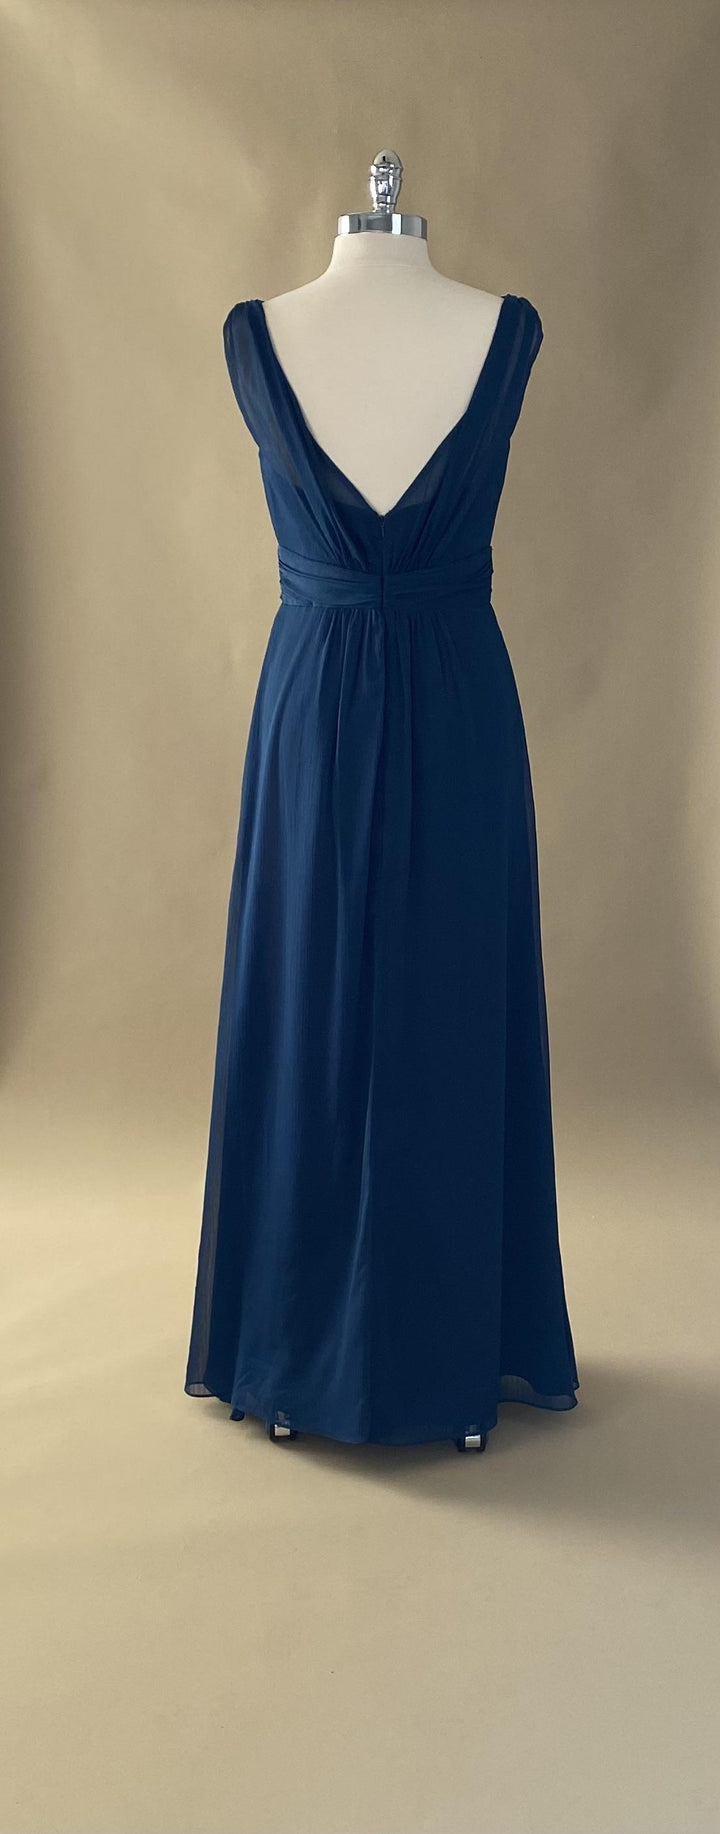 Chiffon Gown with Floral Waist Detail Size 6